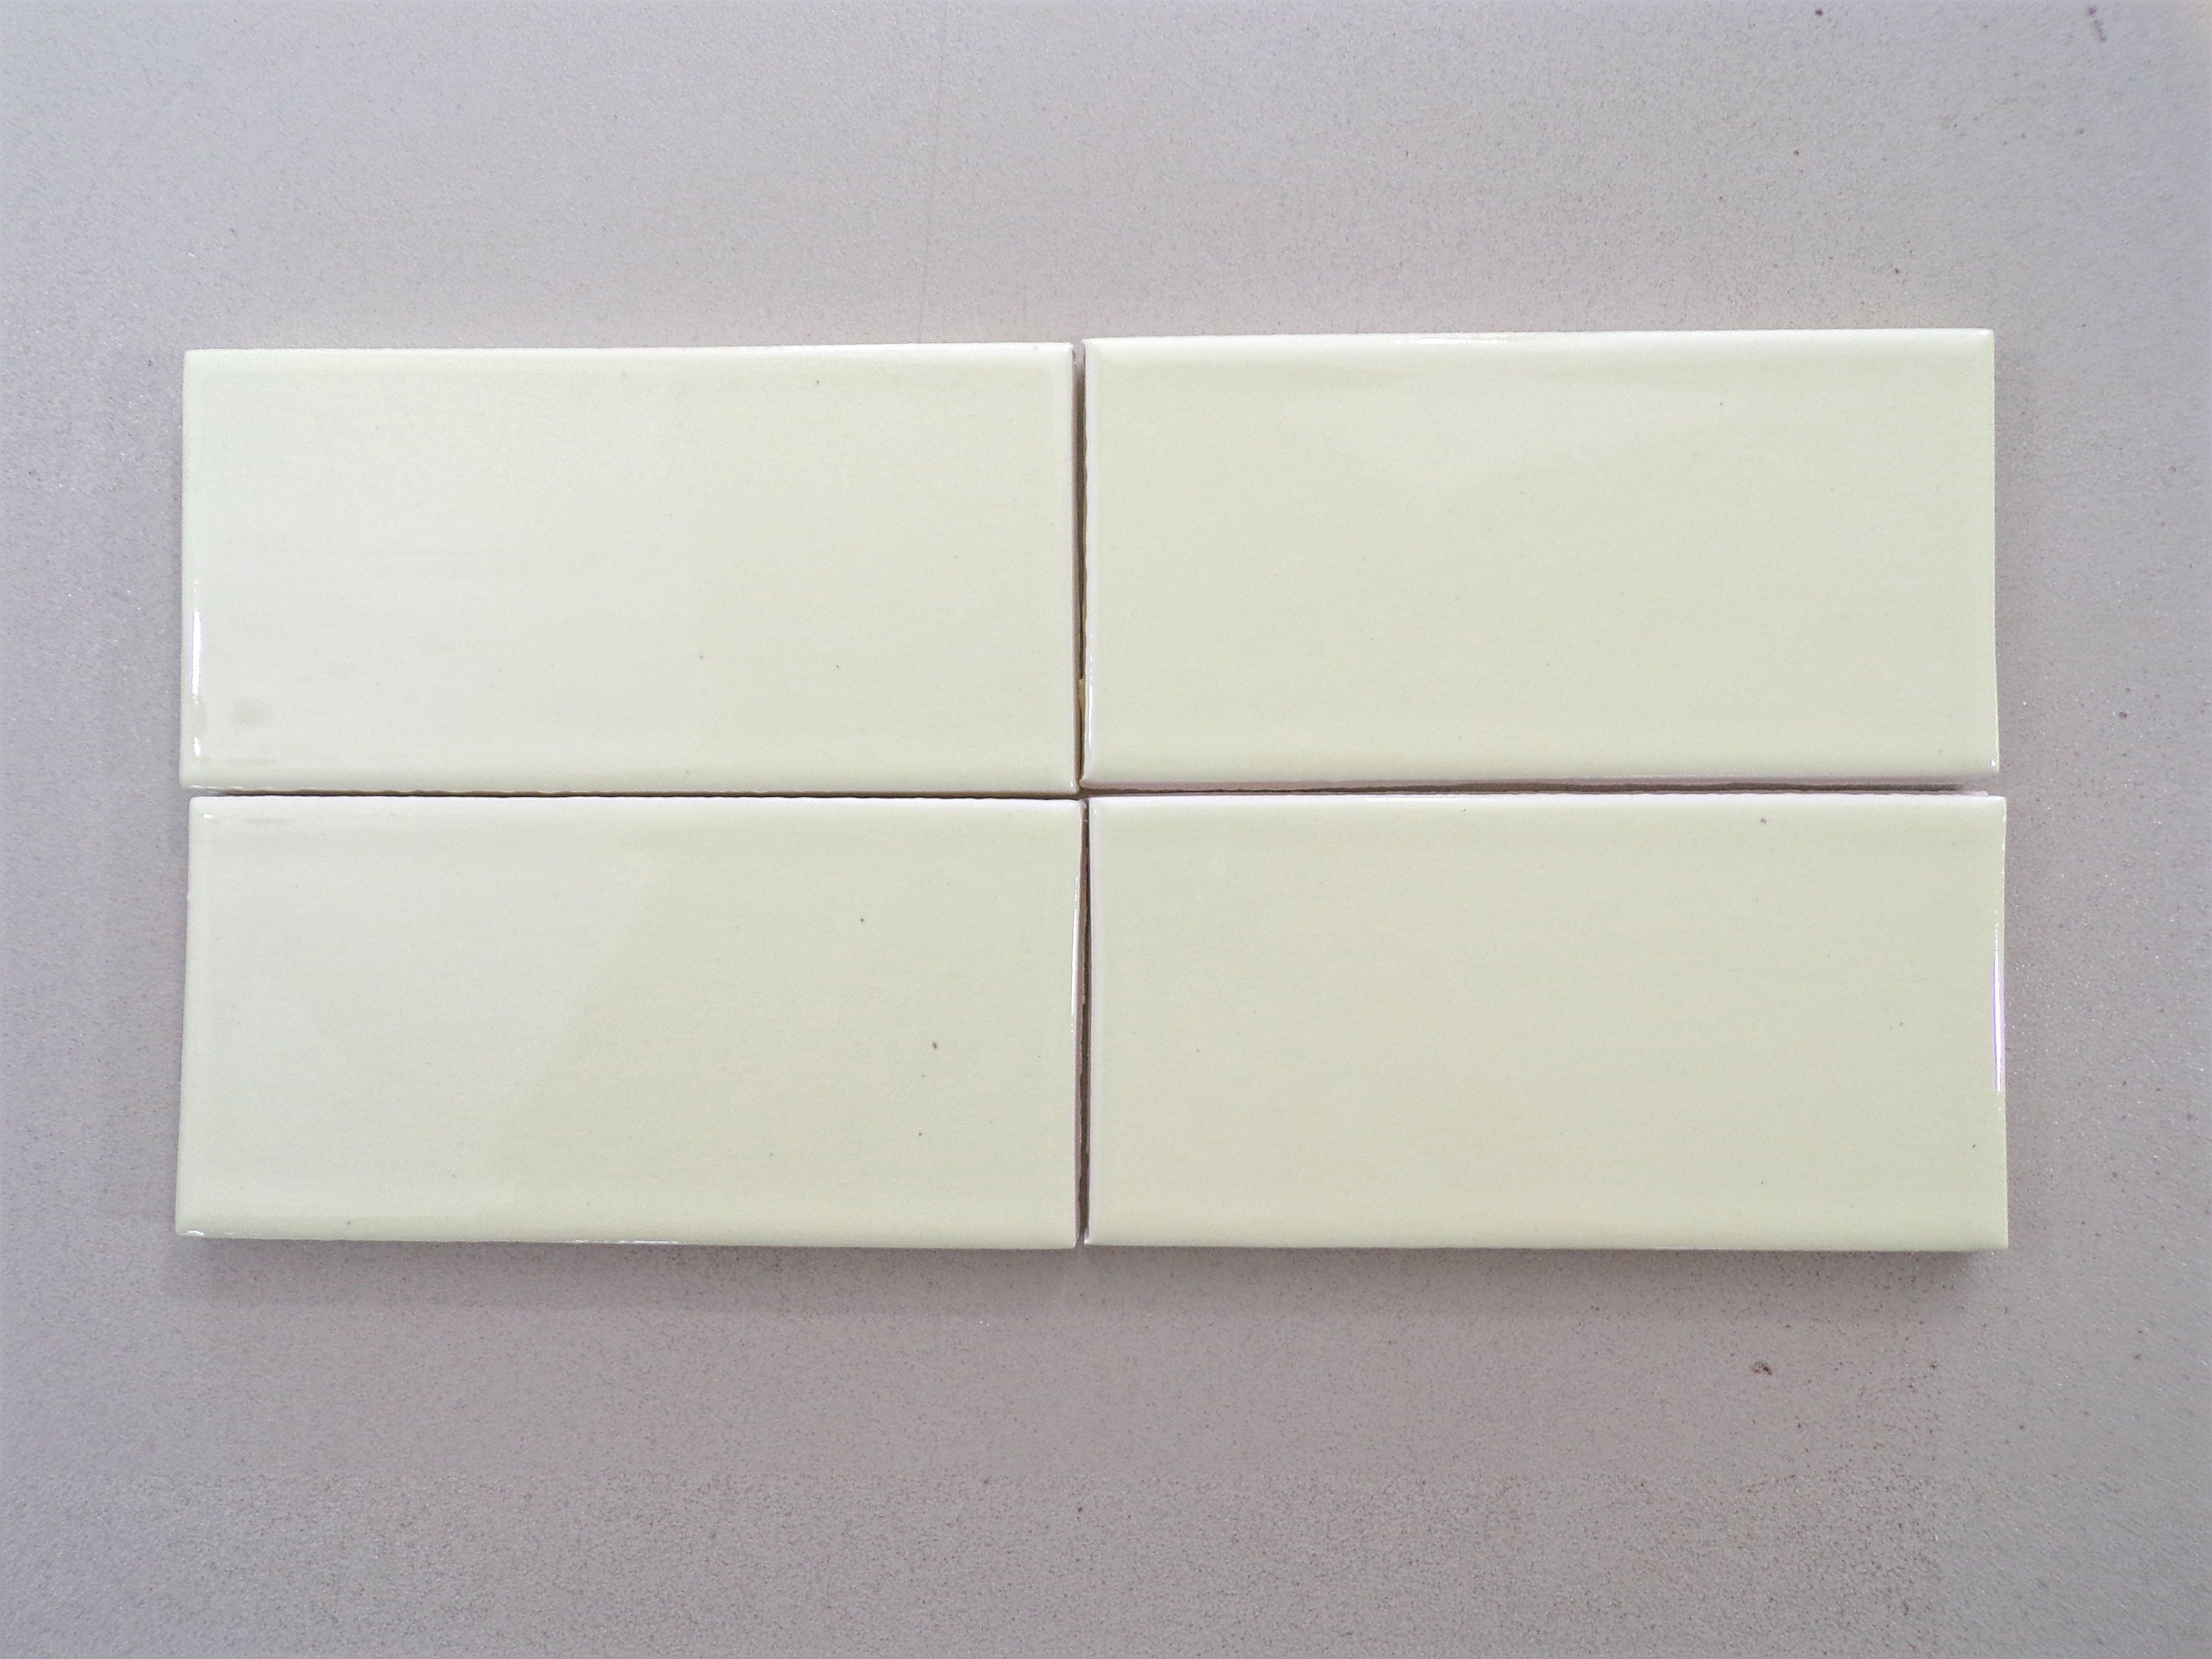 alkove springvand personlighed 25-subway Tile off White/cream Handmade Mexican White Bisque | Etsy